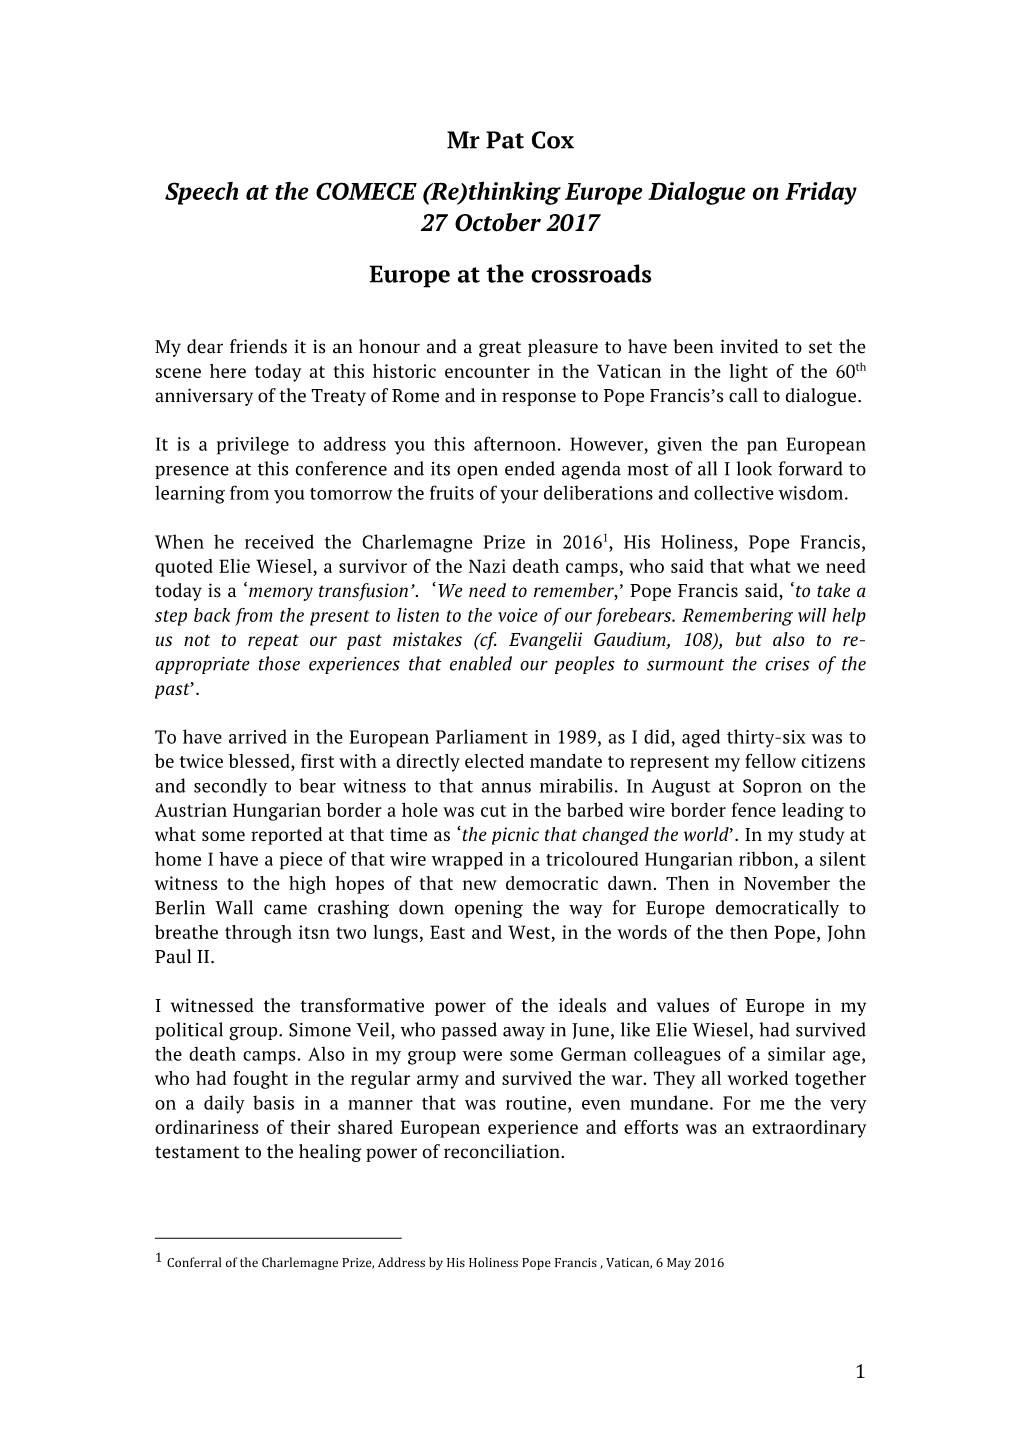 Mr Pat Cox Speech at the COMECE (Re)Thinking Europe Dialogue On